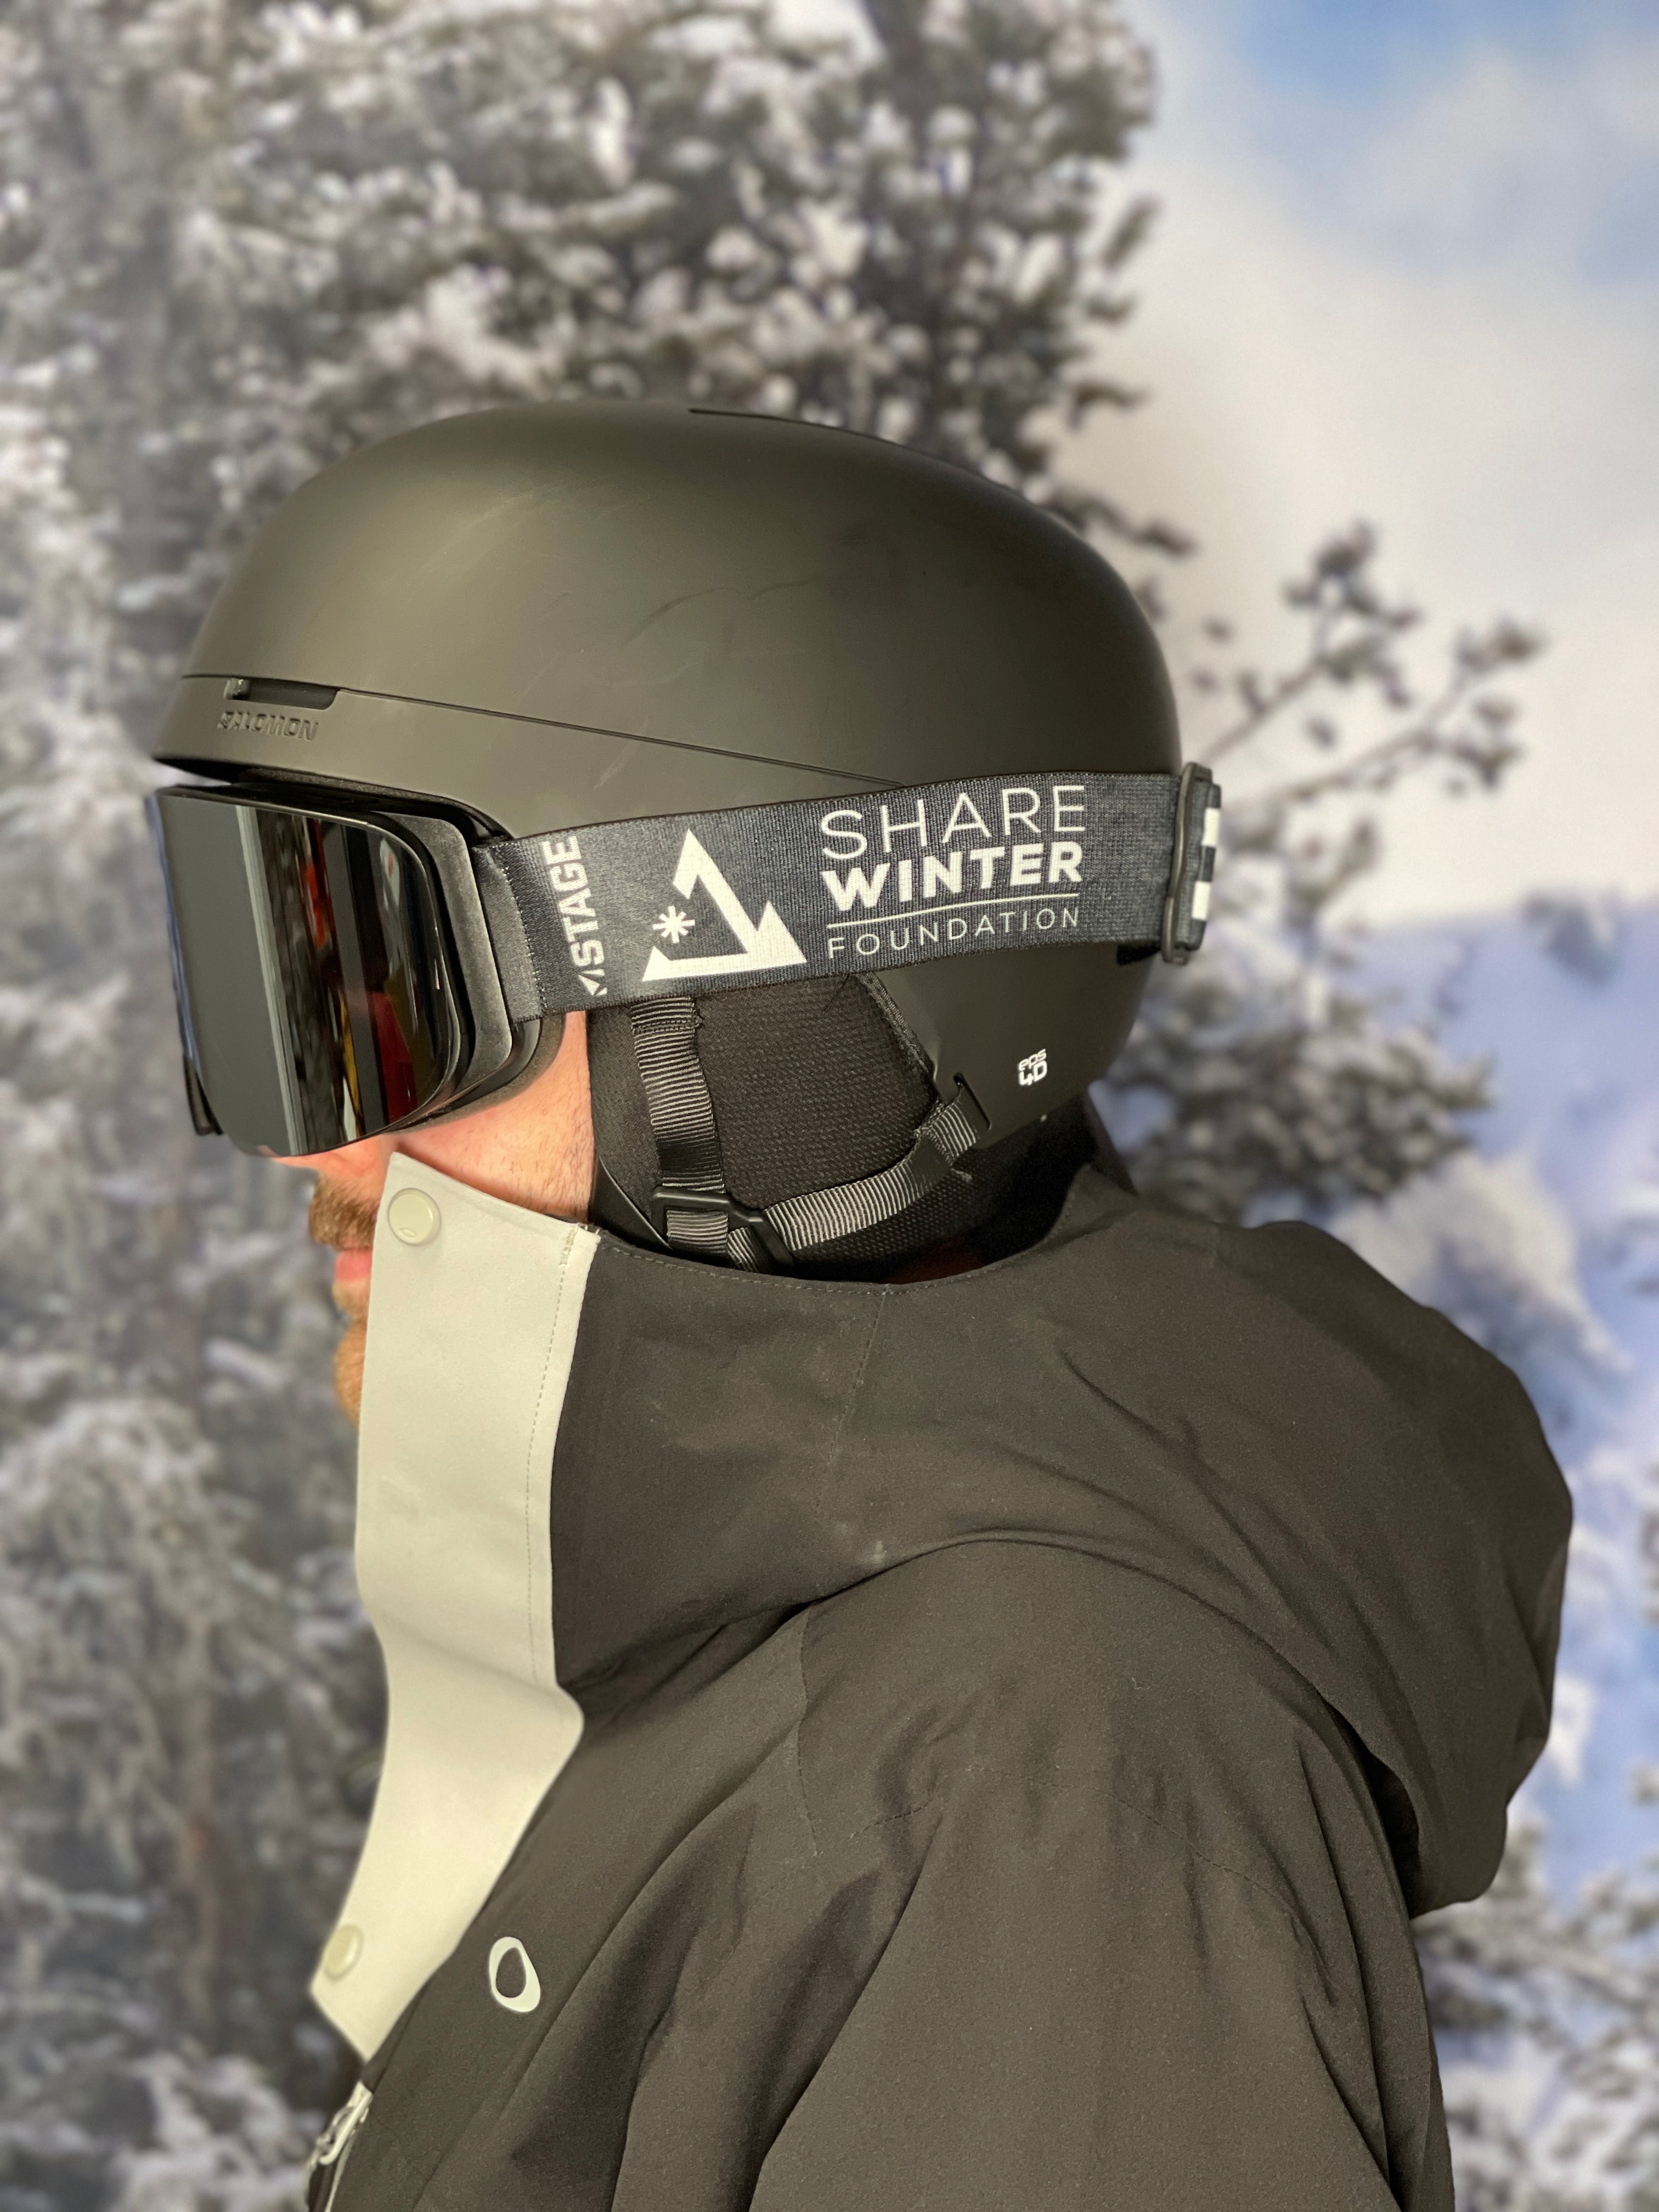 A man wearing a black ski jacket, black helmet, and STAGE Custom Ski Goggles. The snow goggles feature the Share Winter Foundation logo on the strap. The background is snowy.